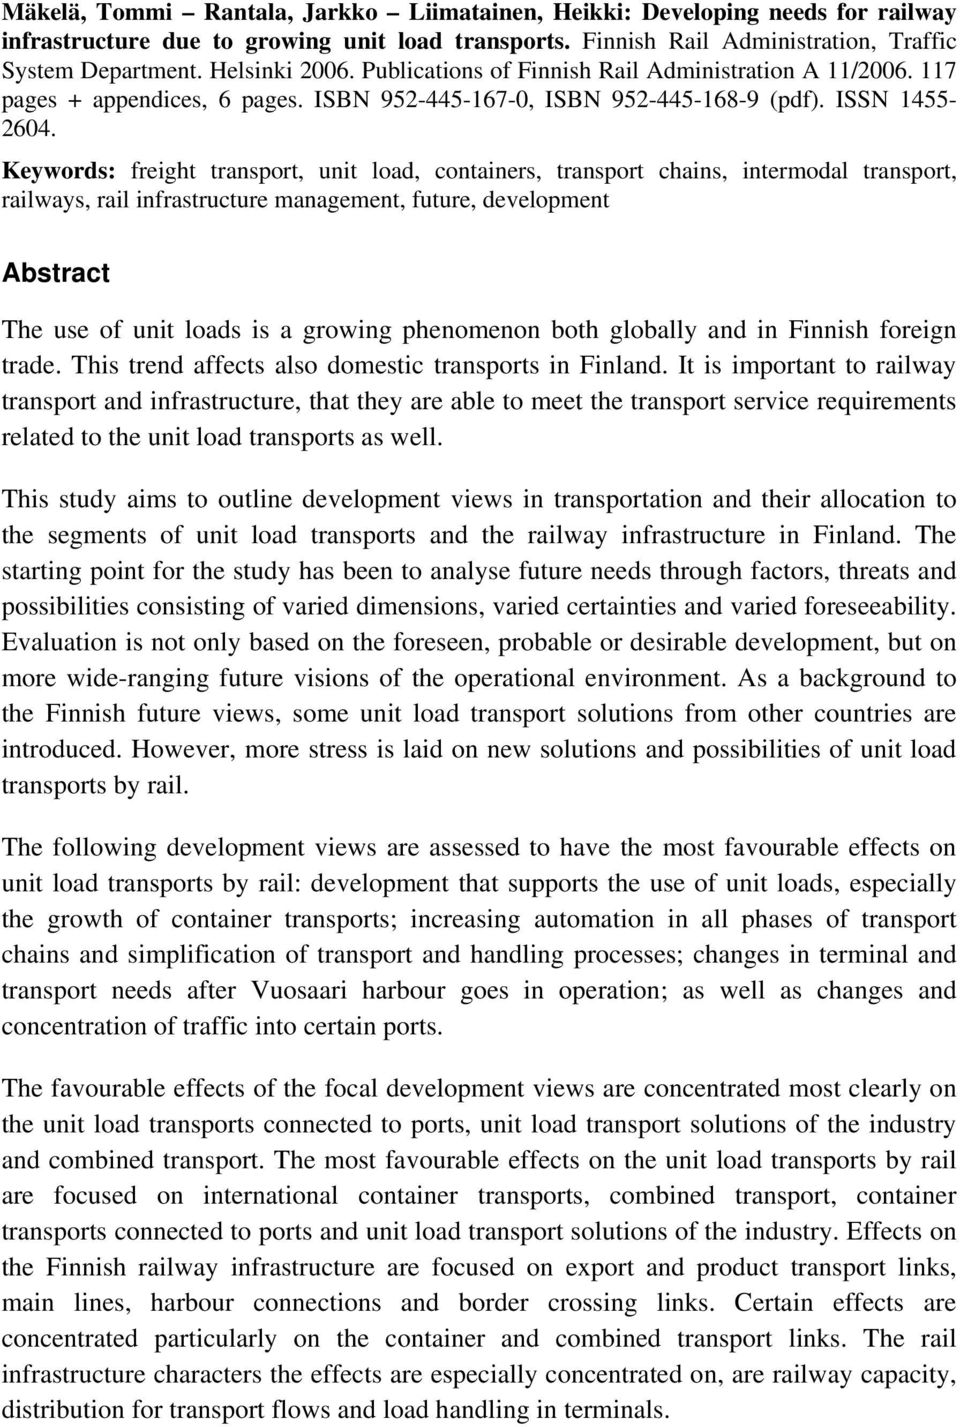 Keywords: freight transport, unit load, containers, transport chains, intermodal transport, railways, rail infrastructure management, future, development Abstract The use of unit loads is a growing